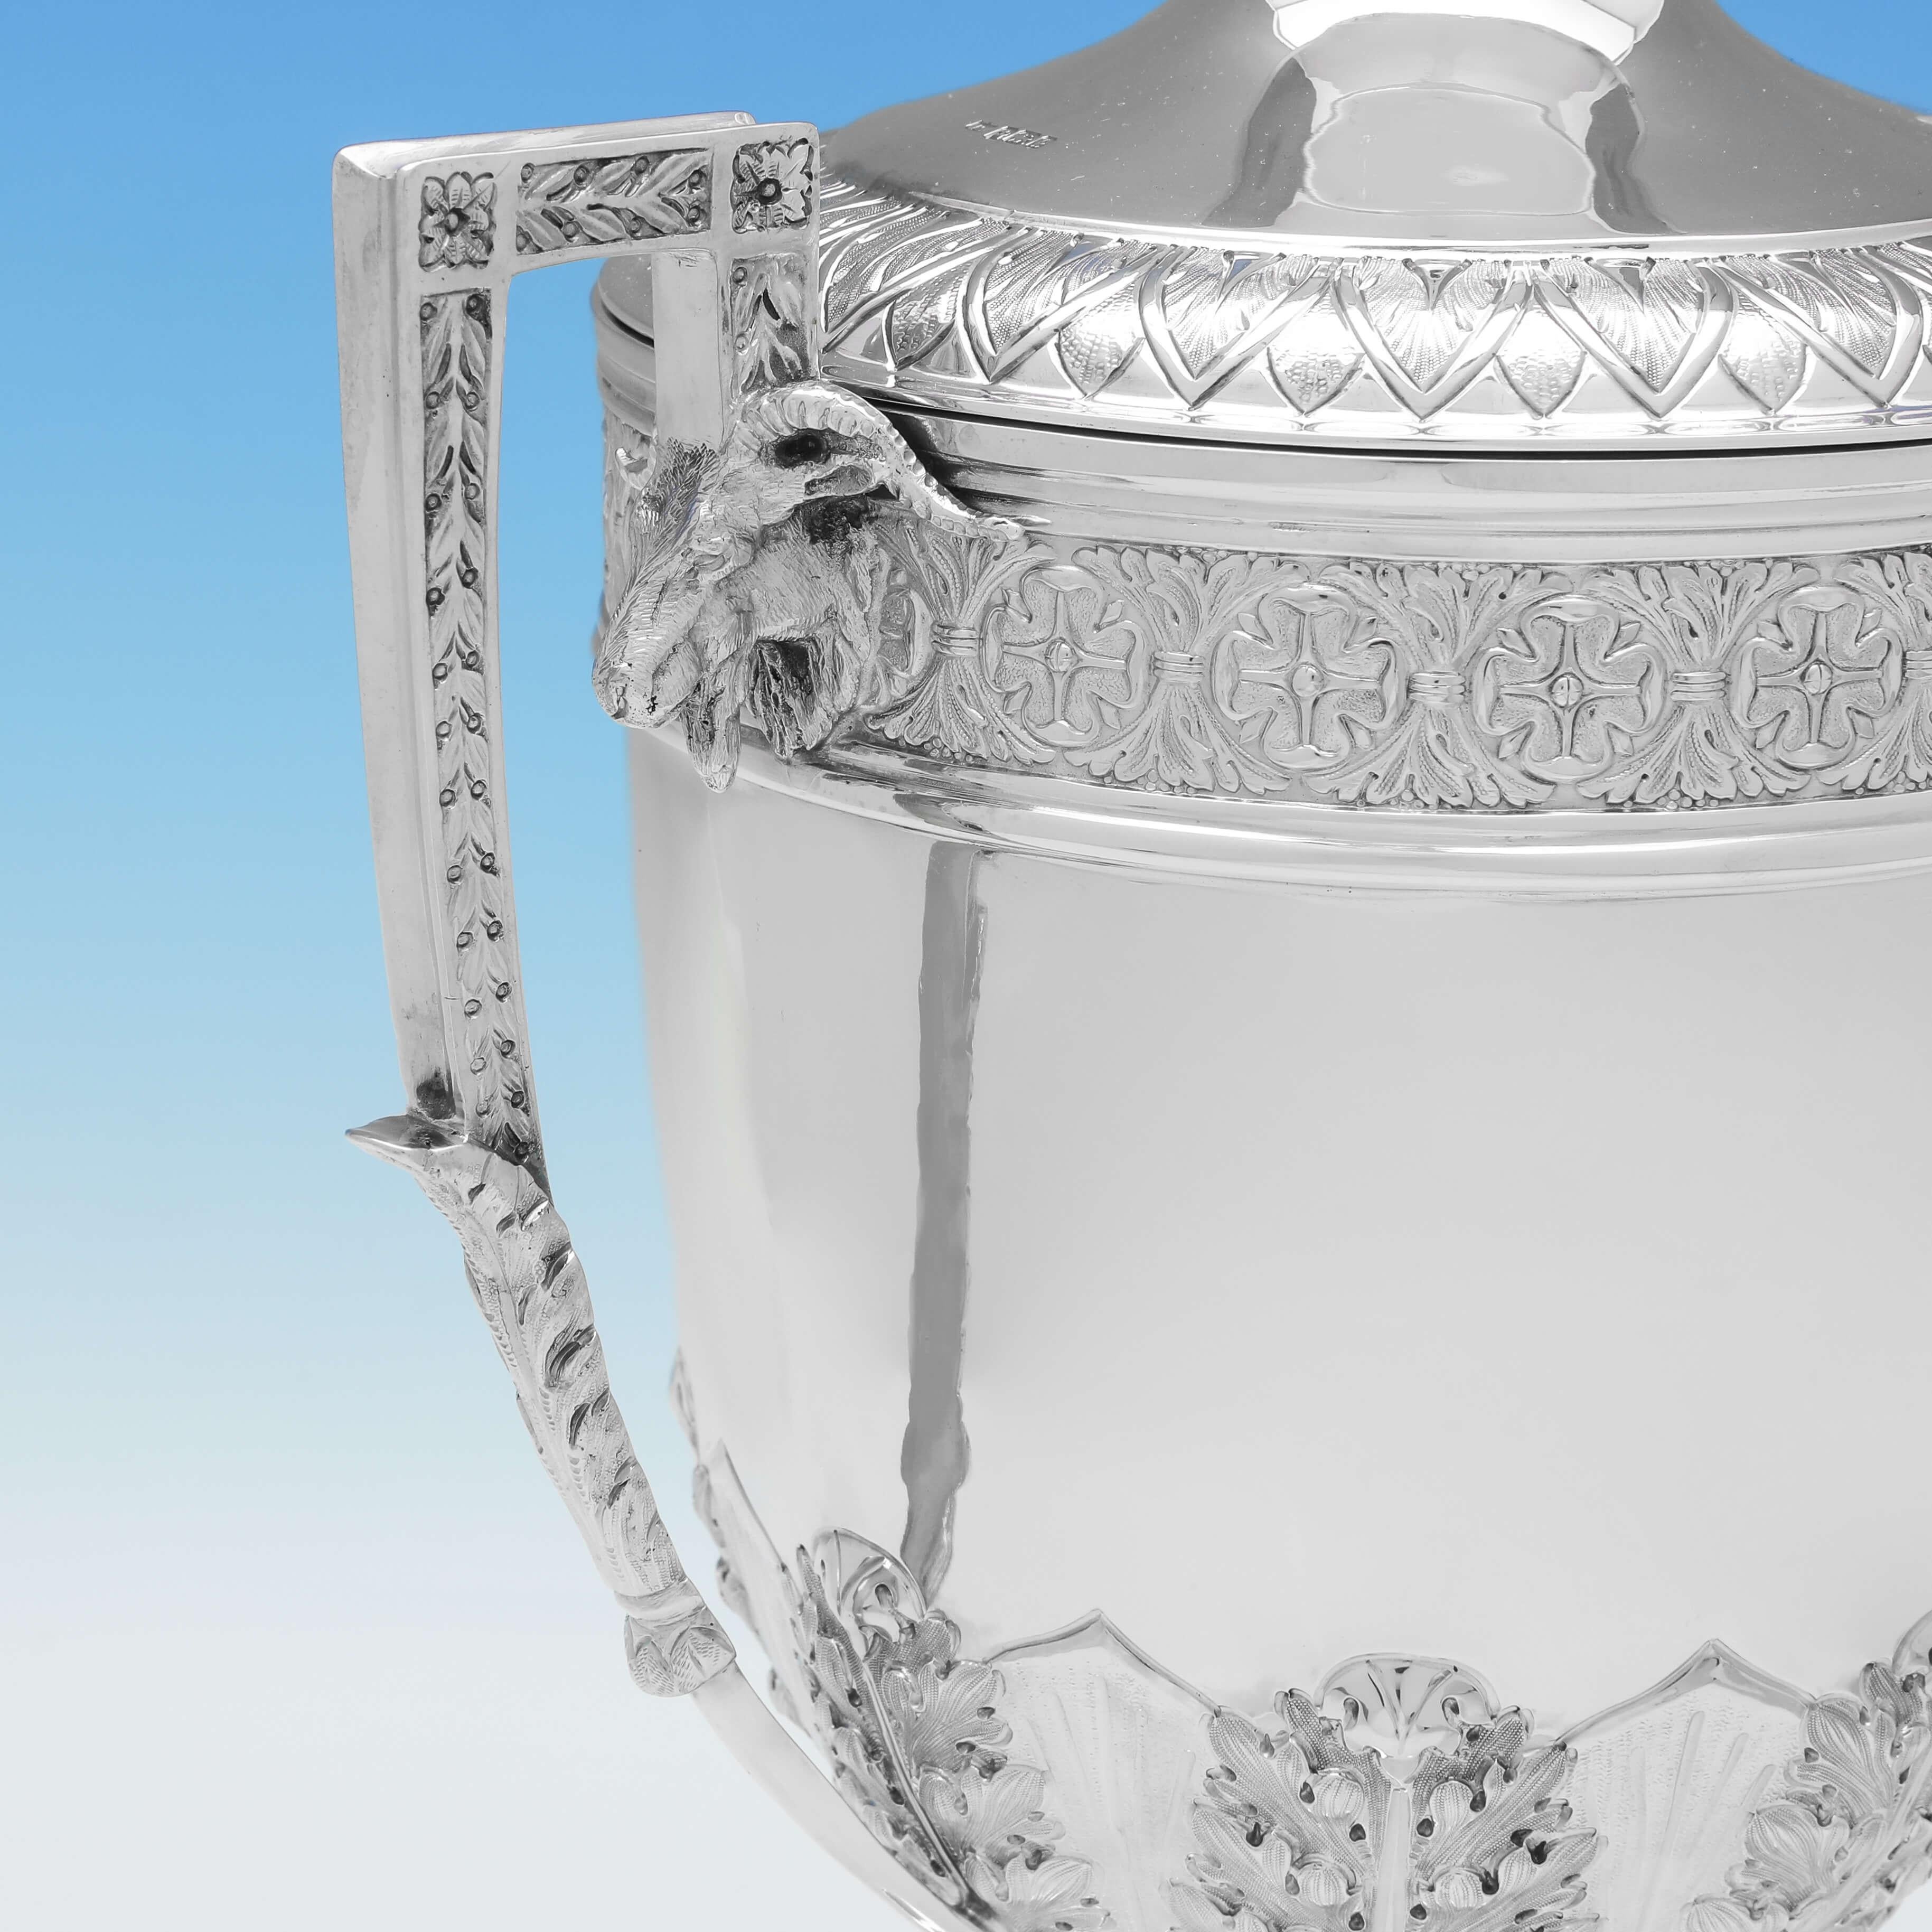 Early 20th Century Adam Style Antique Sterling Silver Trophy or Cup & Cover, 1902 Mappin & Webb